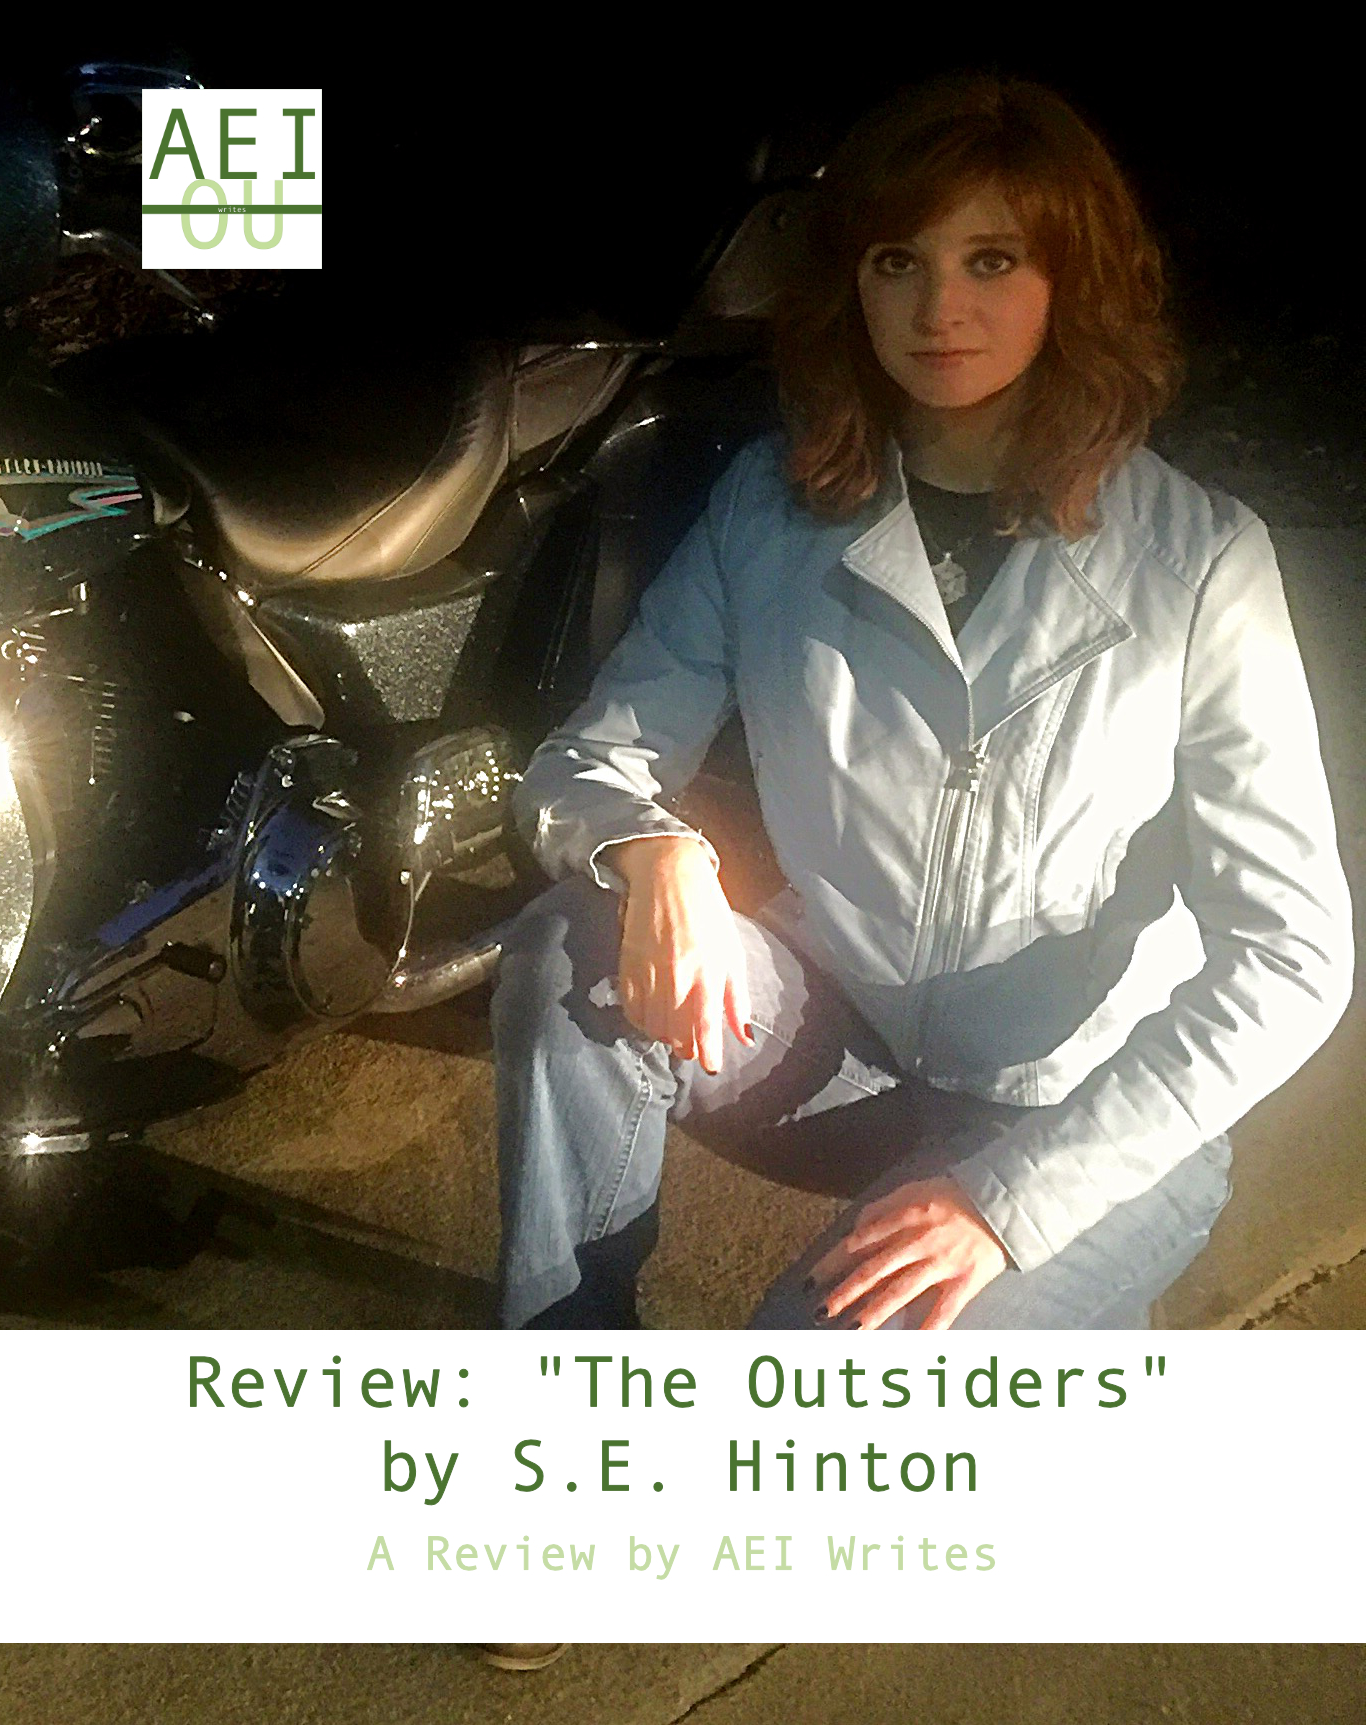 Review: “The Outsiders” by S.E. Hinton